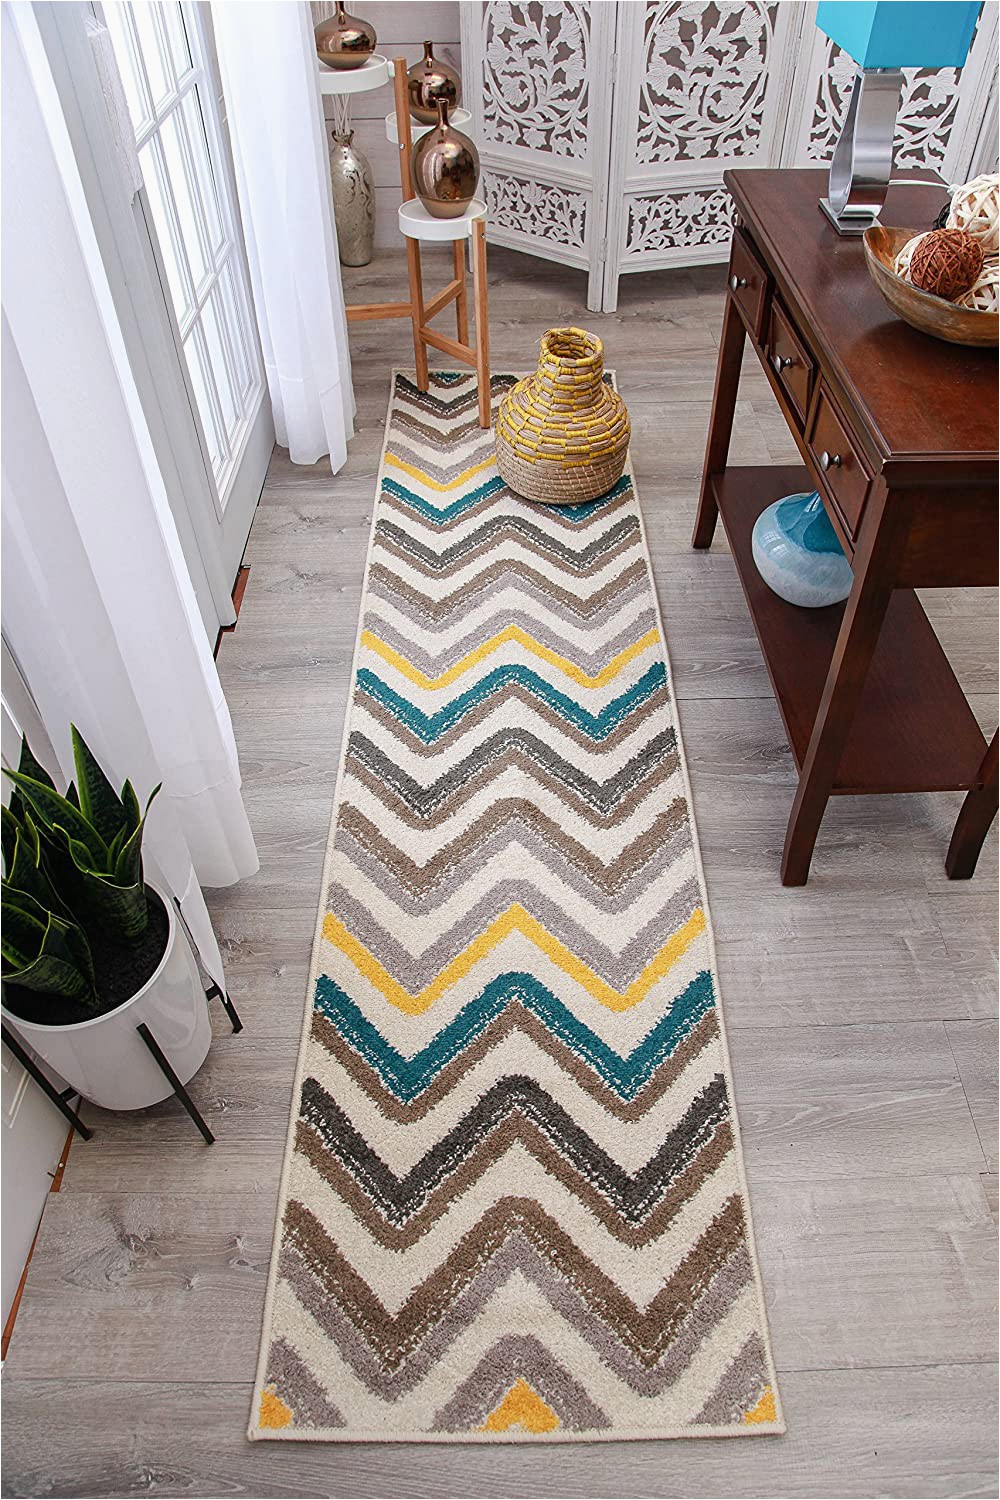 Area Rugs with Matching Hall Runners as Quality Rugs Zigzag Runner Rug Hallway Grey Cream Blue Yellow Brown 2×8 Runner Rug Hallway 2×7 Long Chevron Runners Rug Hallway Narrow Rug Hall